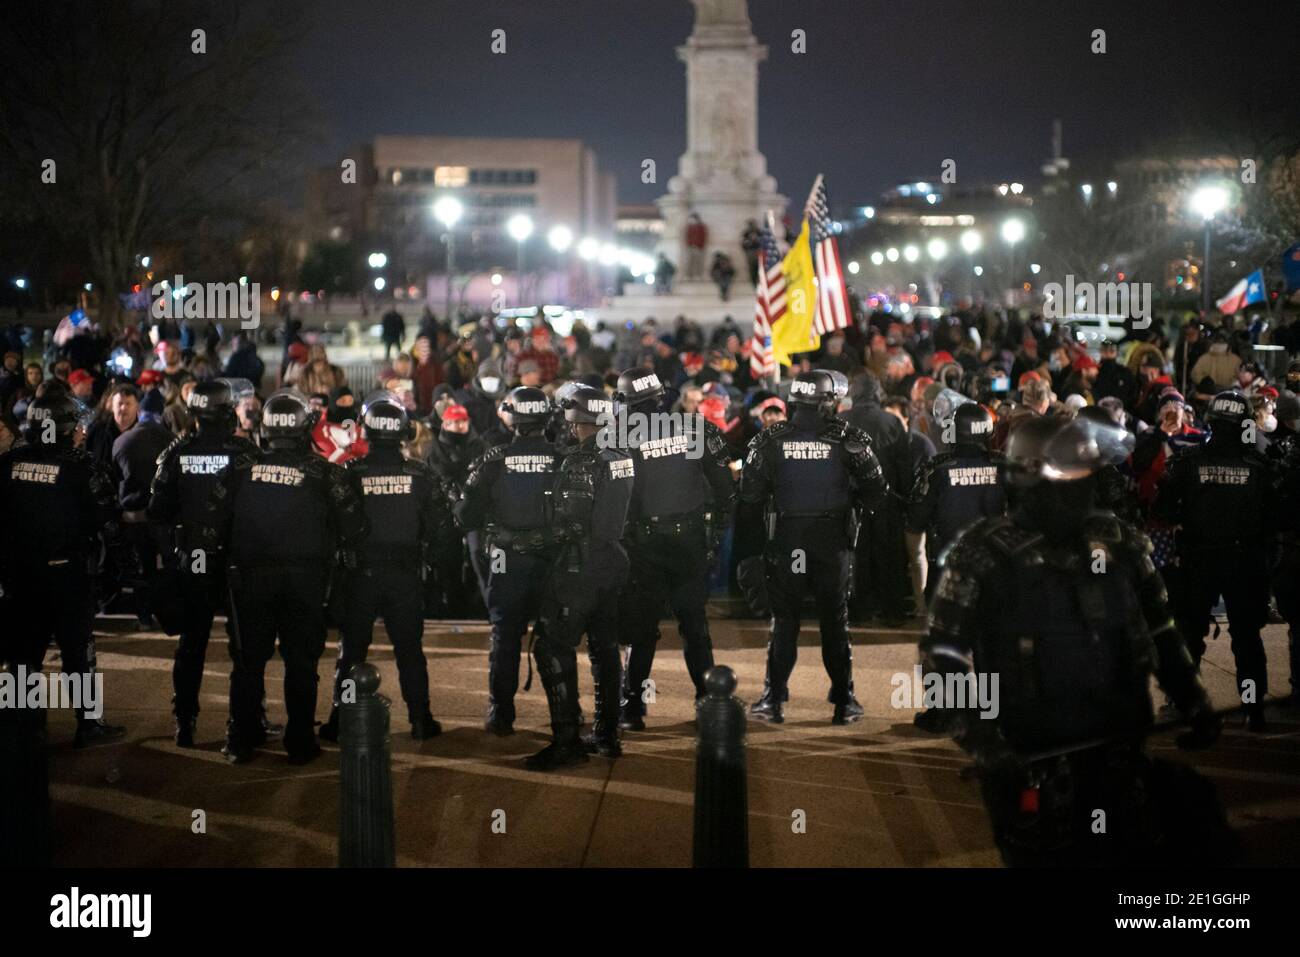 January 6, 2021: DC Metro Police as well as other Law Enforcement are shown on the U.S. Capitol grounds after rioters clash against the U.S. Capitol Police and stormed The Capitol during a march and protest in Washington, DC. Credit: Brian Branch Price/ZUMA Wire/Alamy Live News Stock Photo